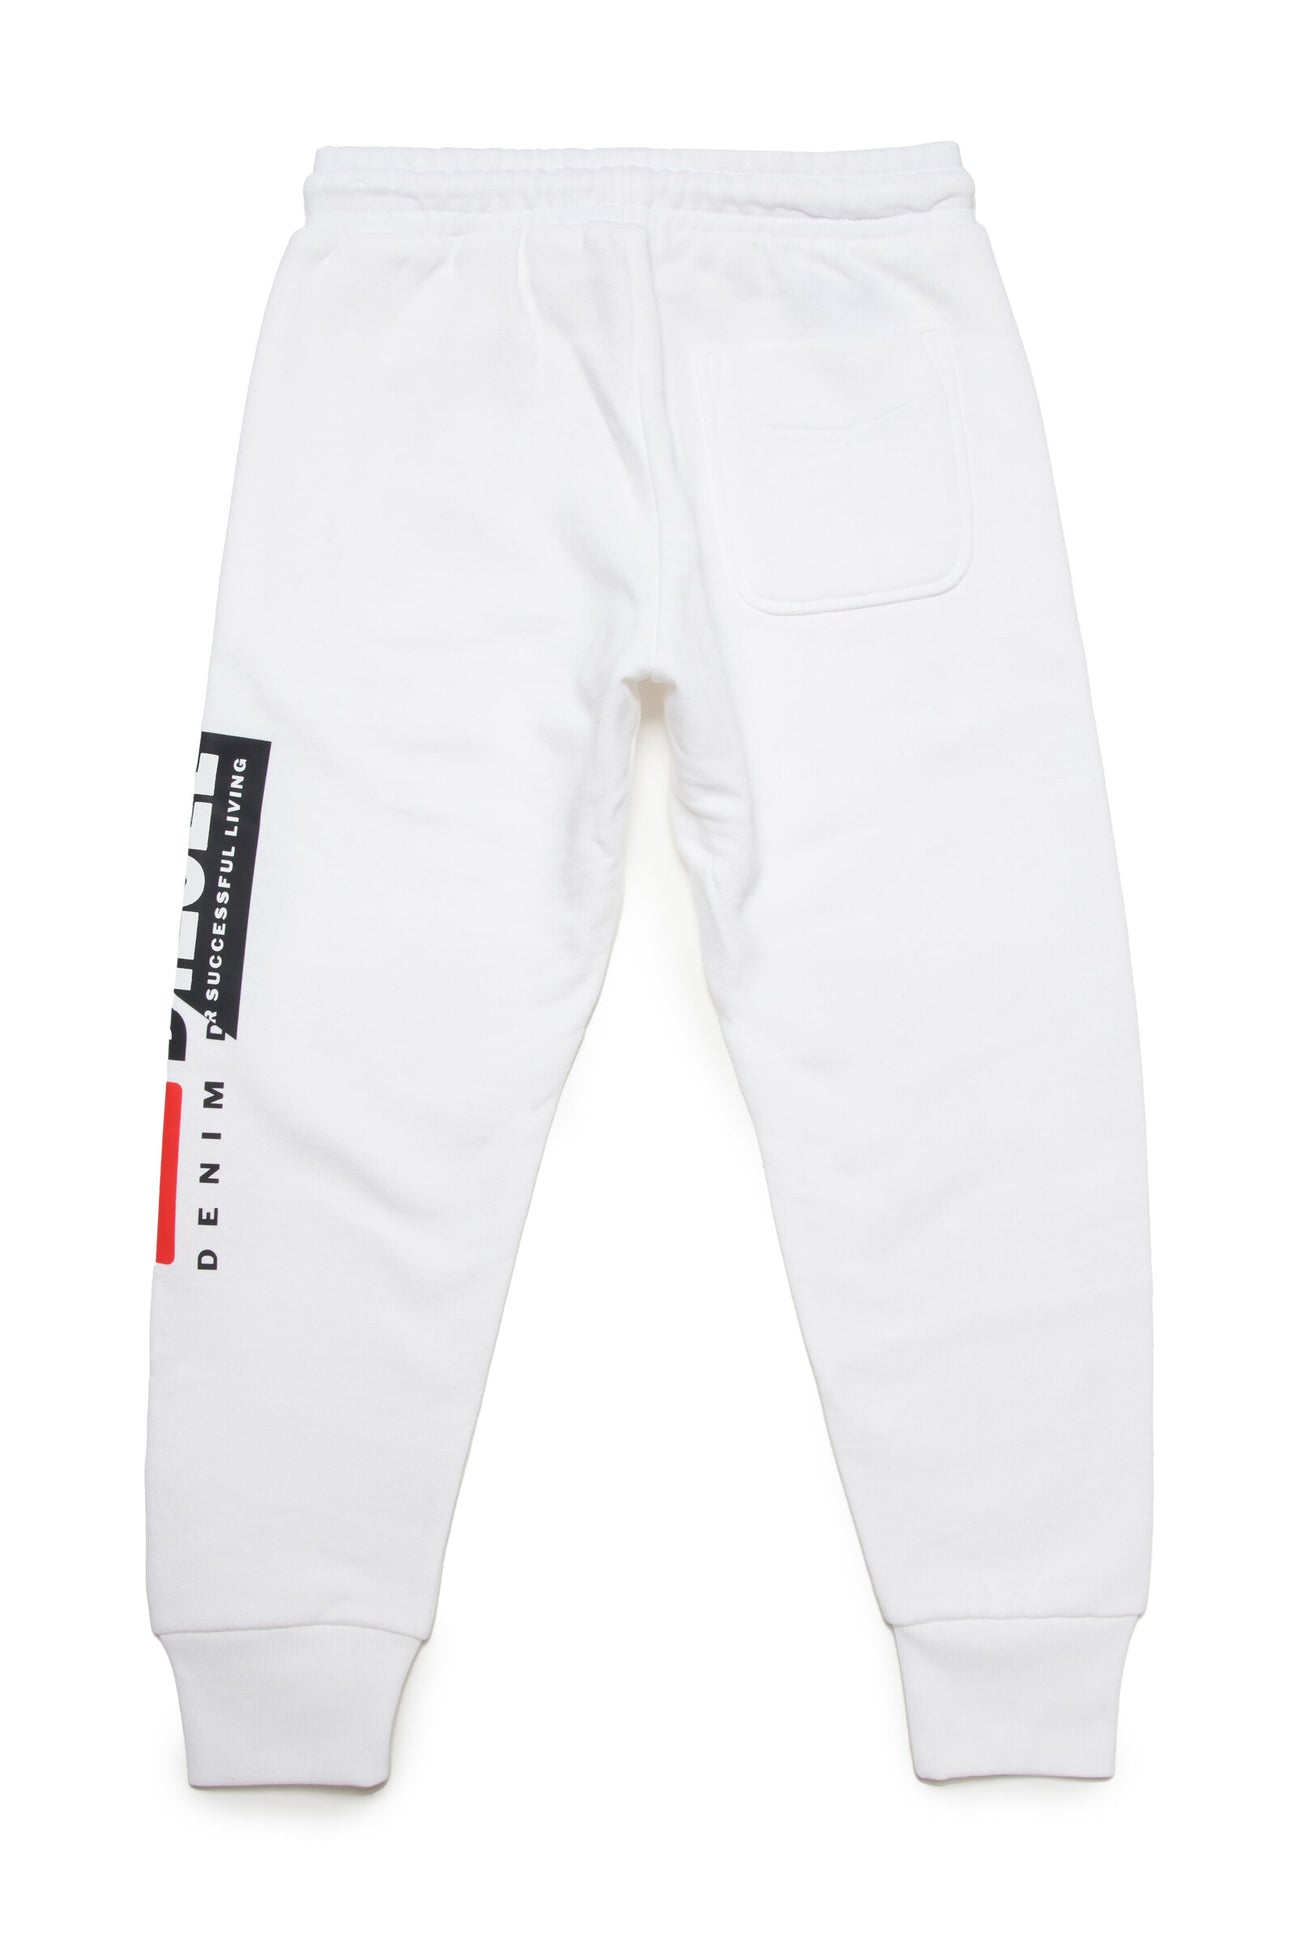 White jogger pants with Diesel double logo White jogger pants with Diesel double logo